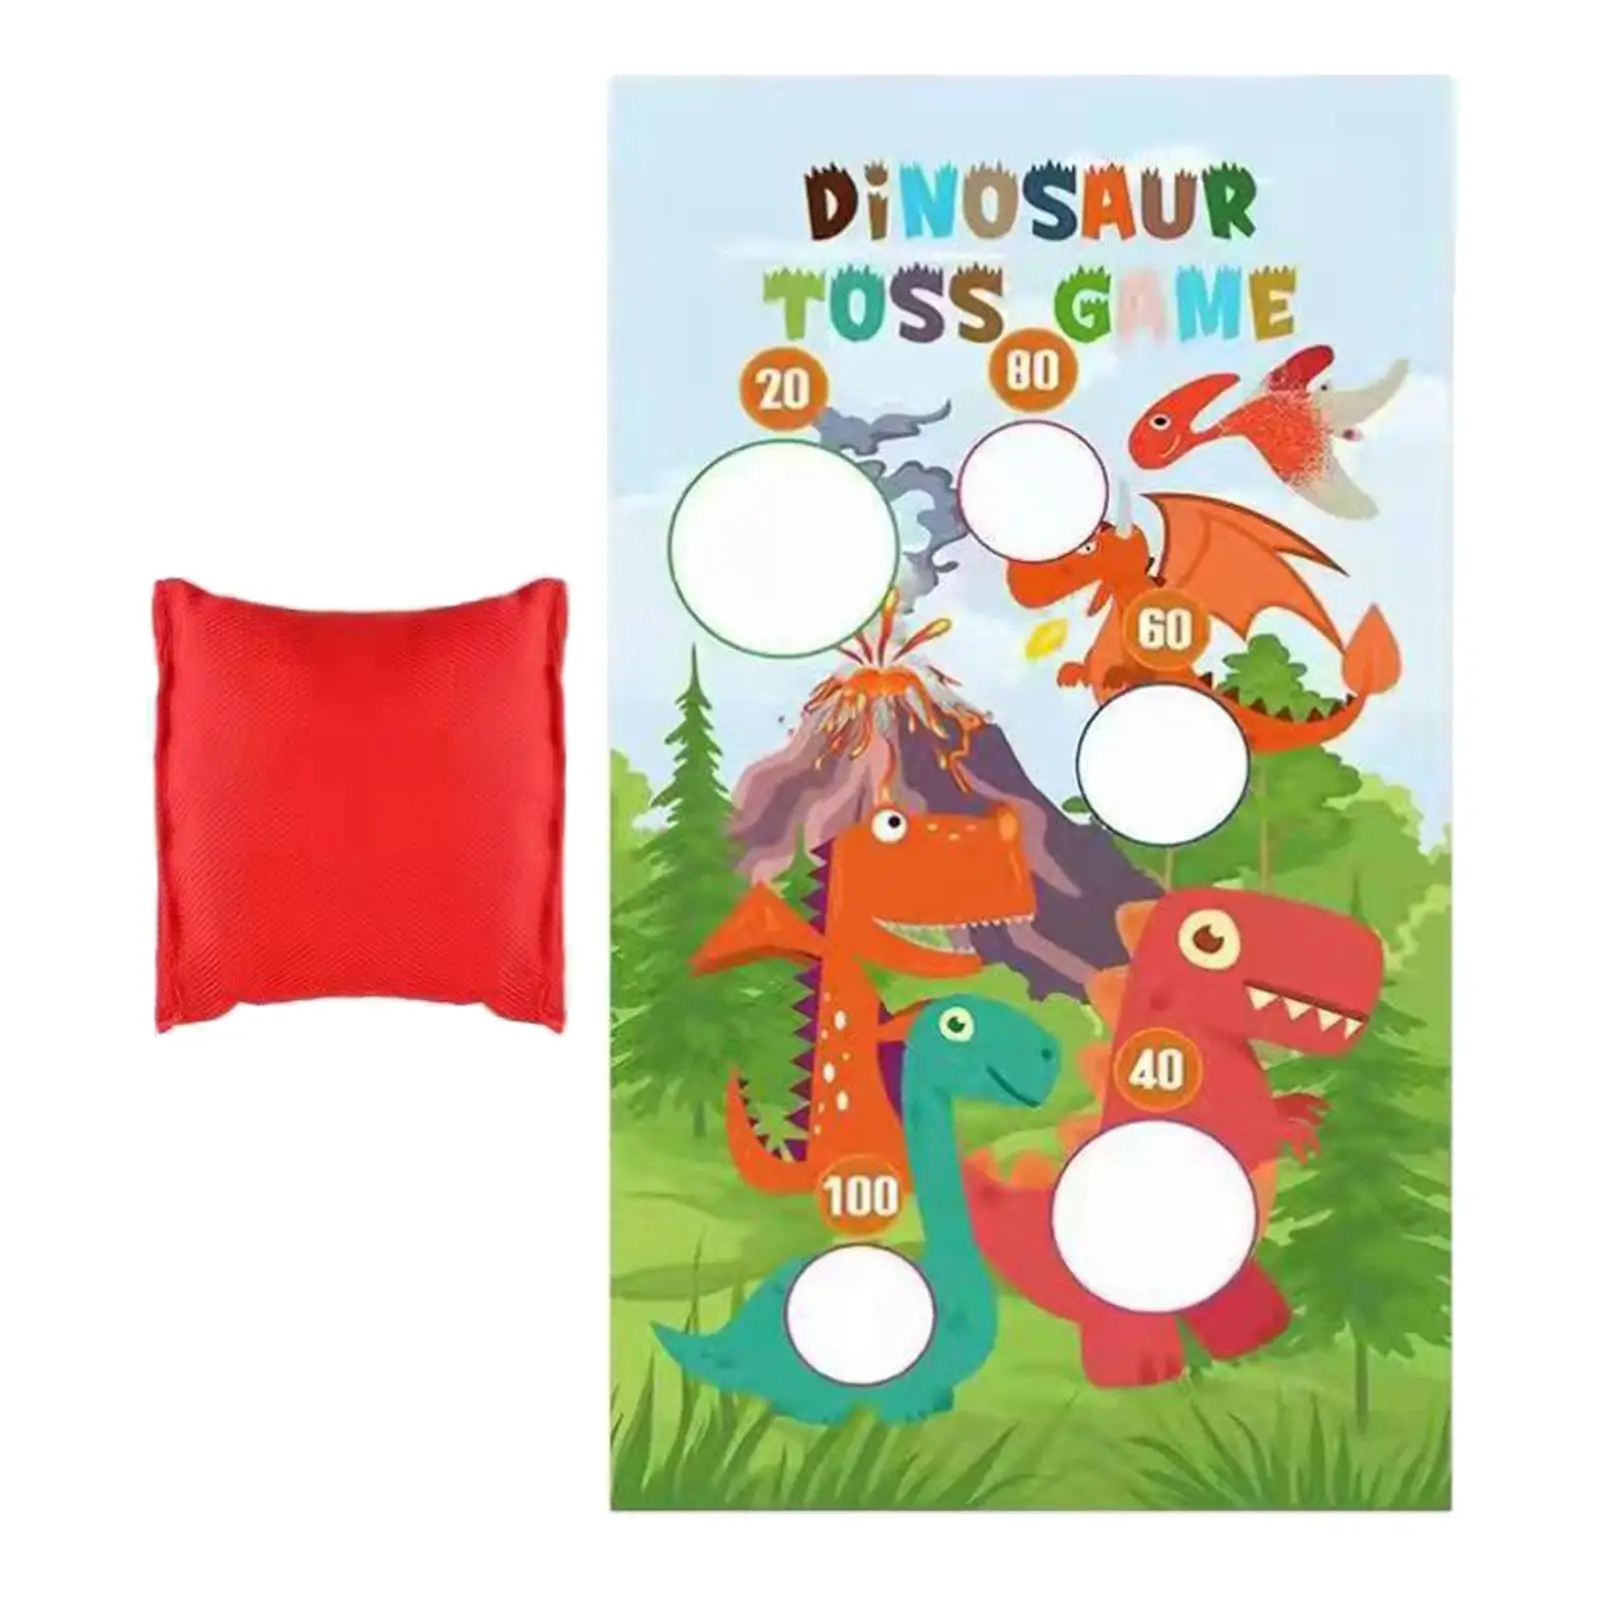 Dinosaur Throwing Game   Kit with Bag Game Twine Washable for Camping